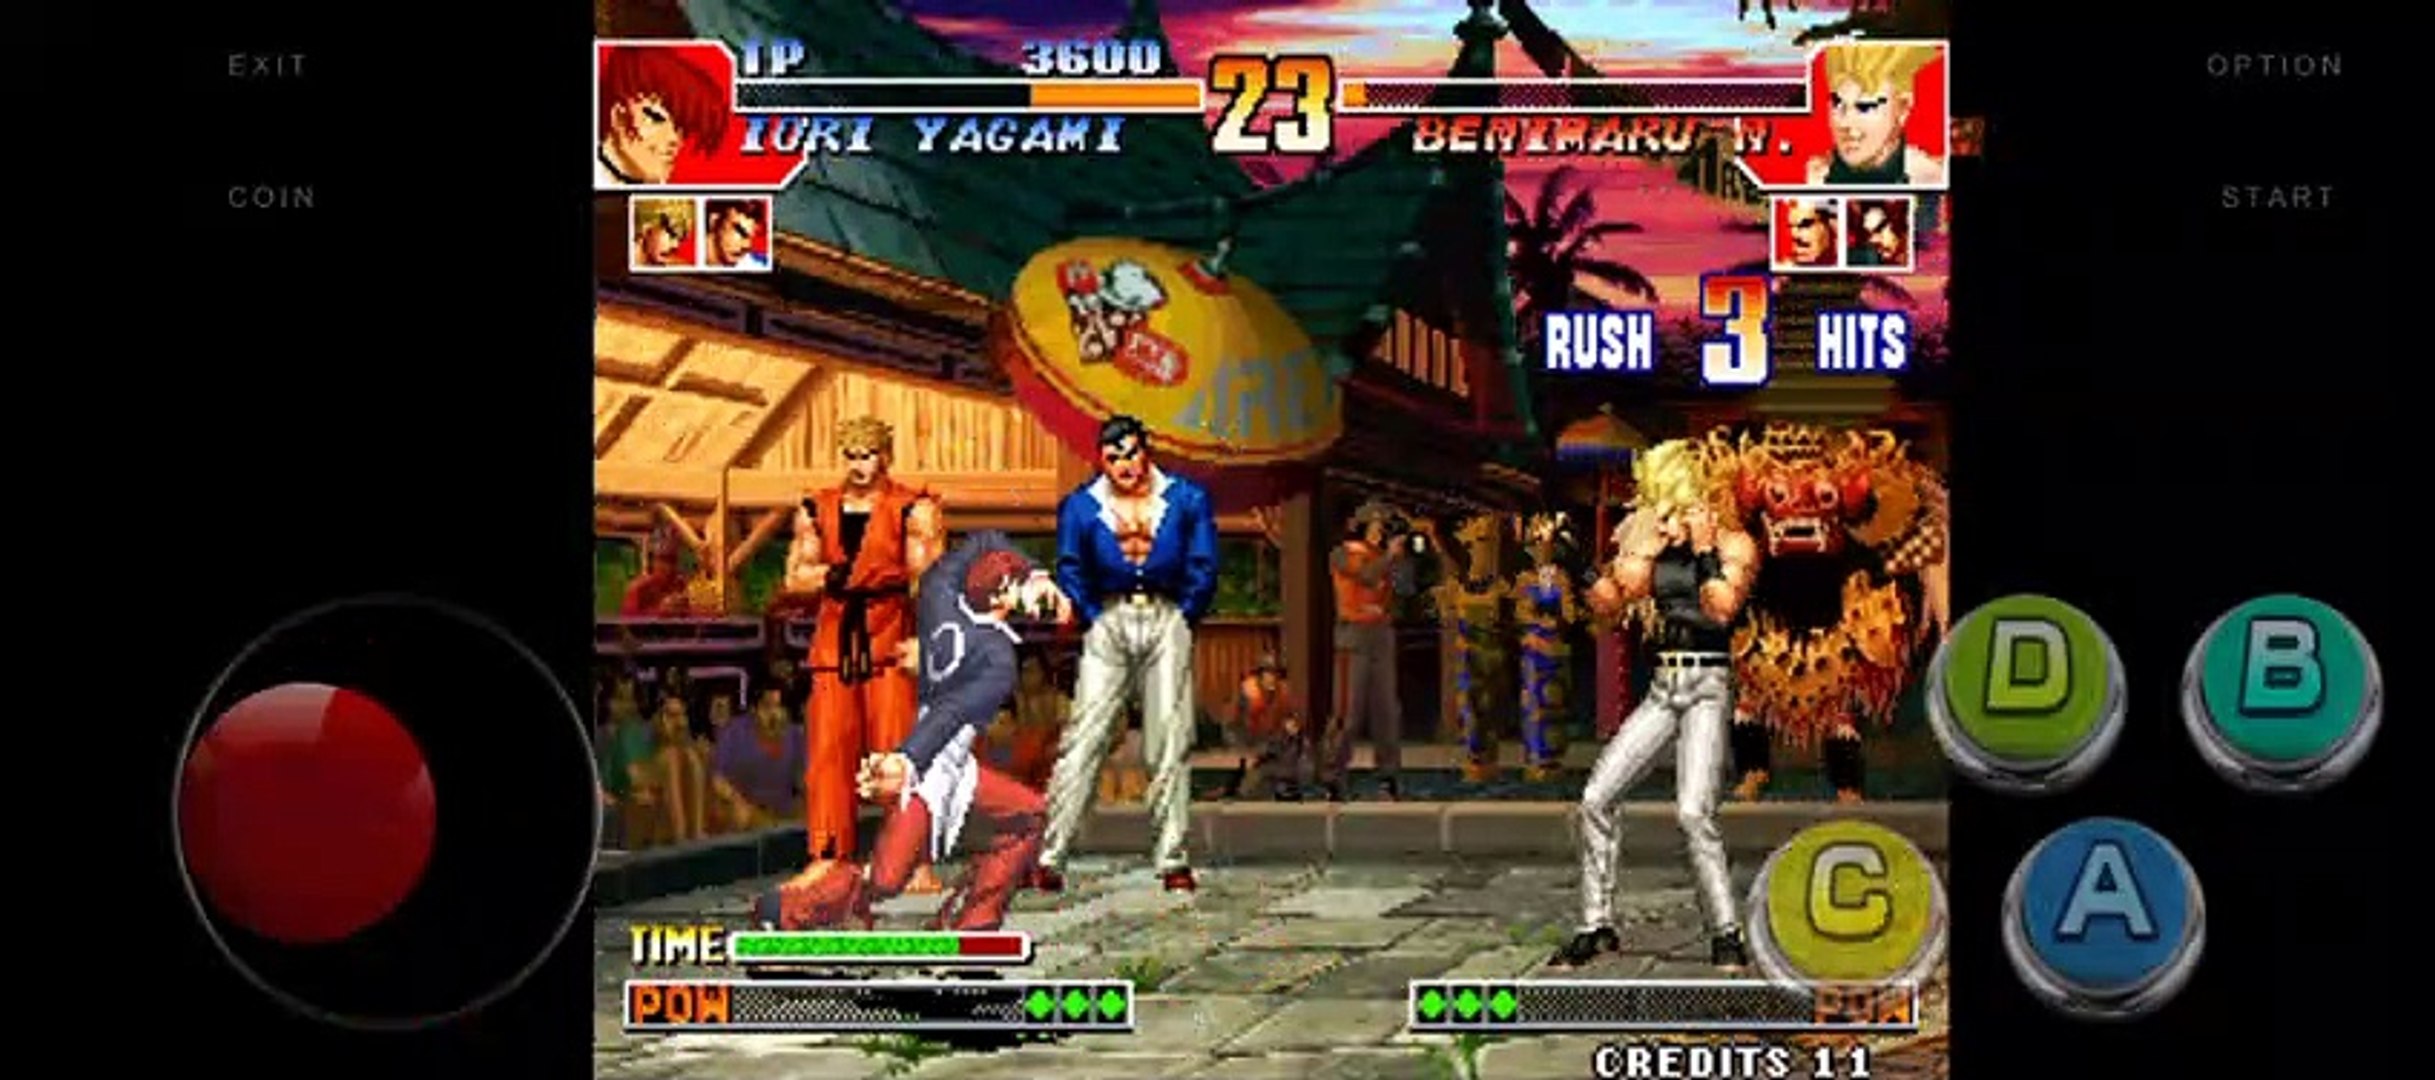 The king of fighter 97 plus Android apk - Vidéo Dailymotion